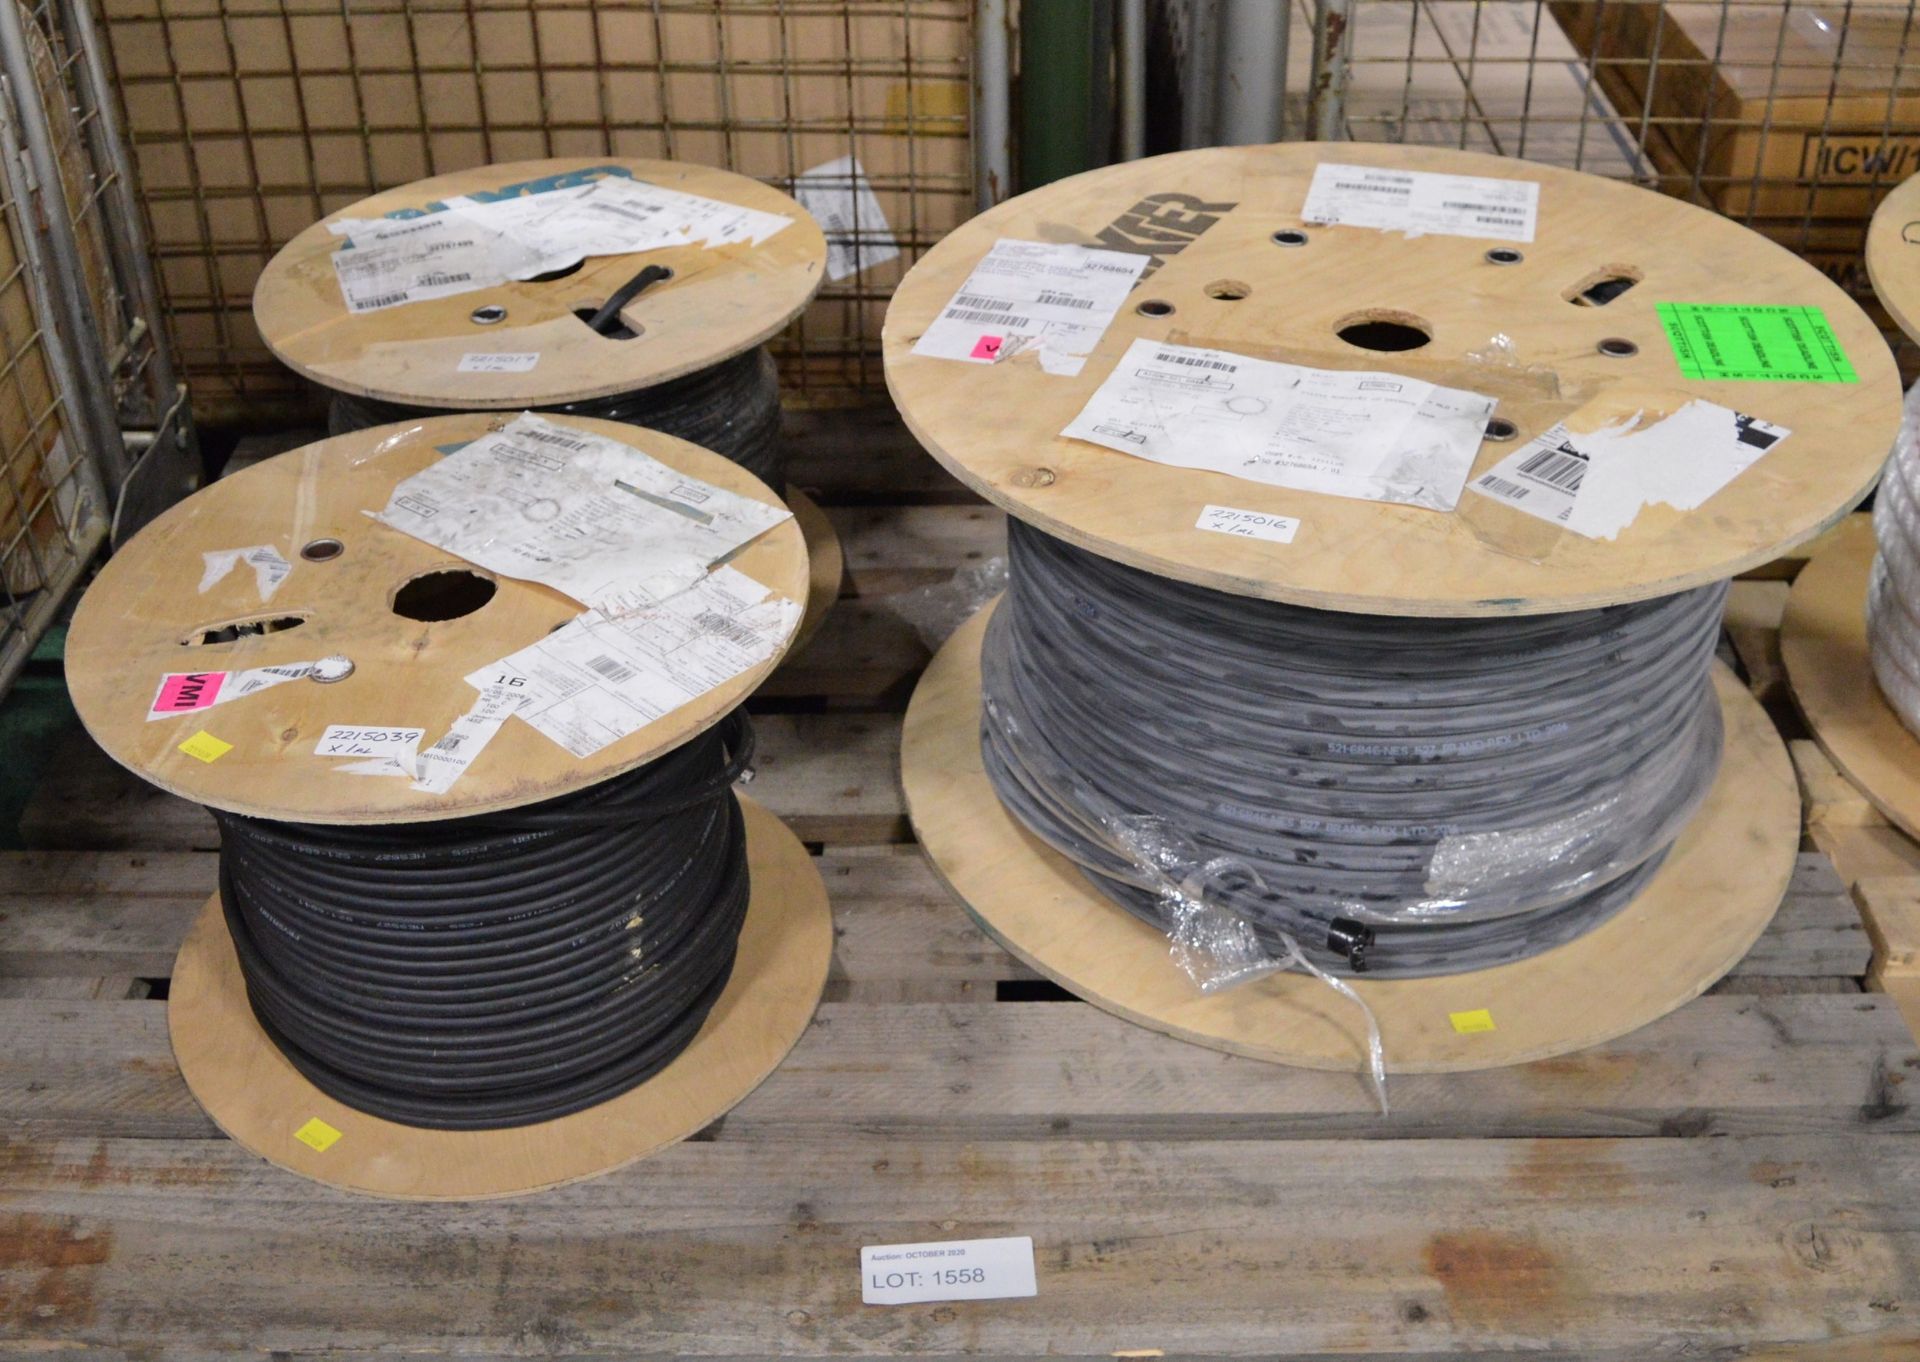 Electric Cable Reel - 521-6846-NES 527 (Unknown Length), Electric Cable Reel - Prysmian -